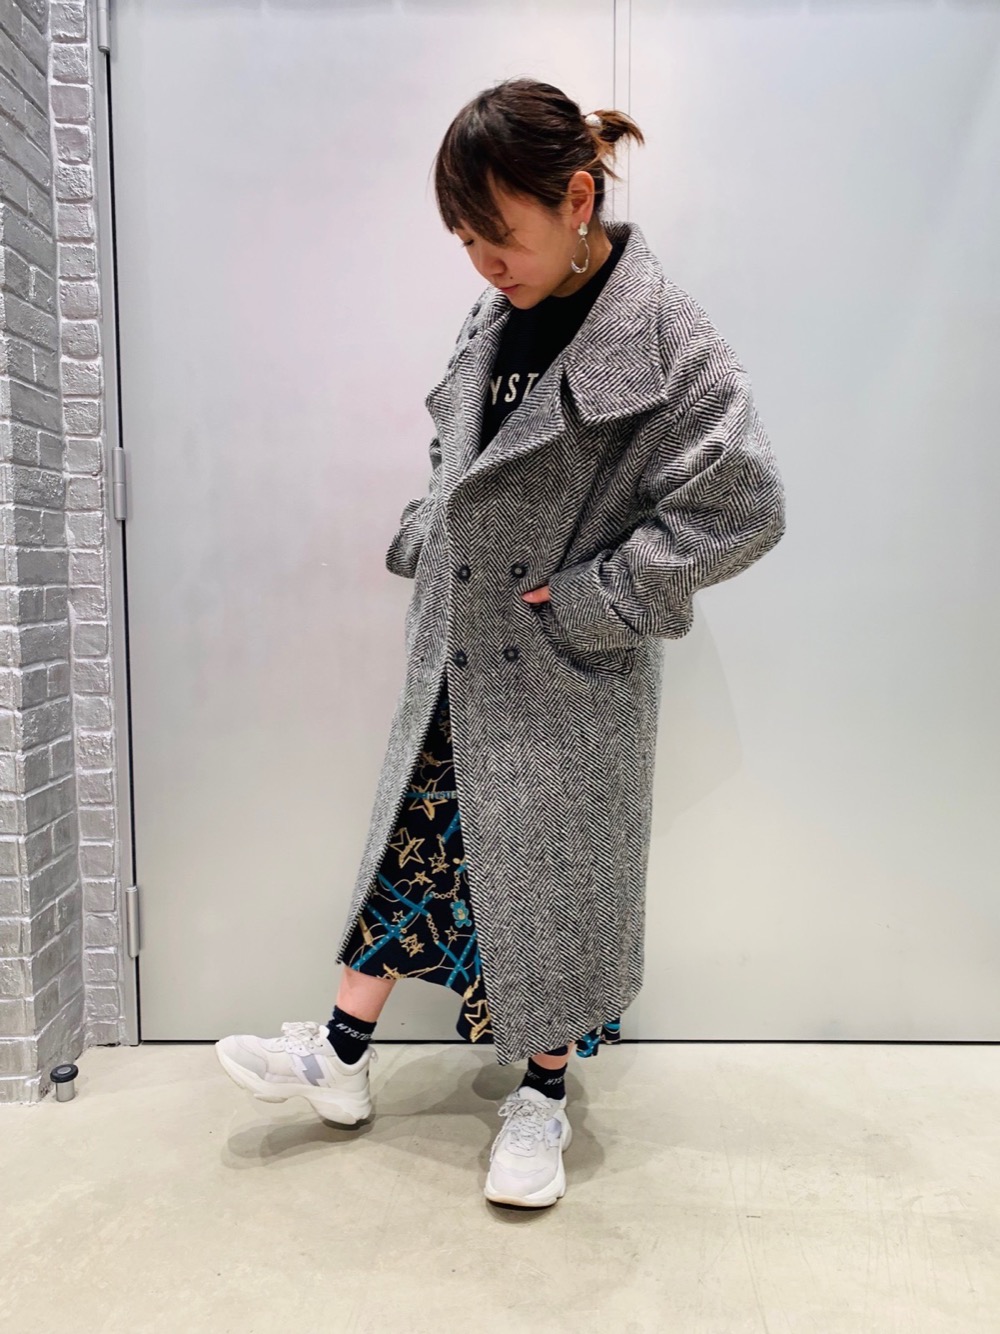 HYSTERIC GLAMOURラゾーナ川崎プラザ店NABE / HYSTERIC GLAMOUR styling